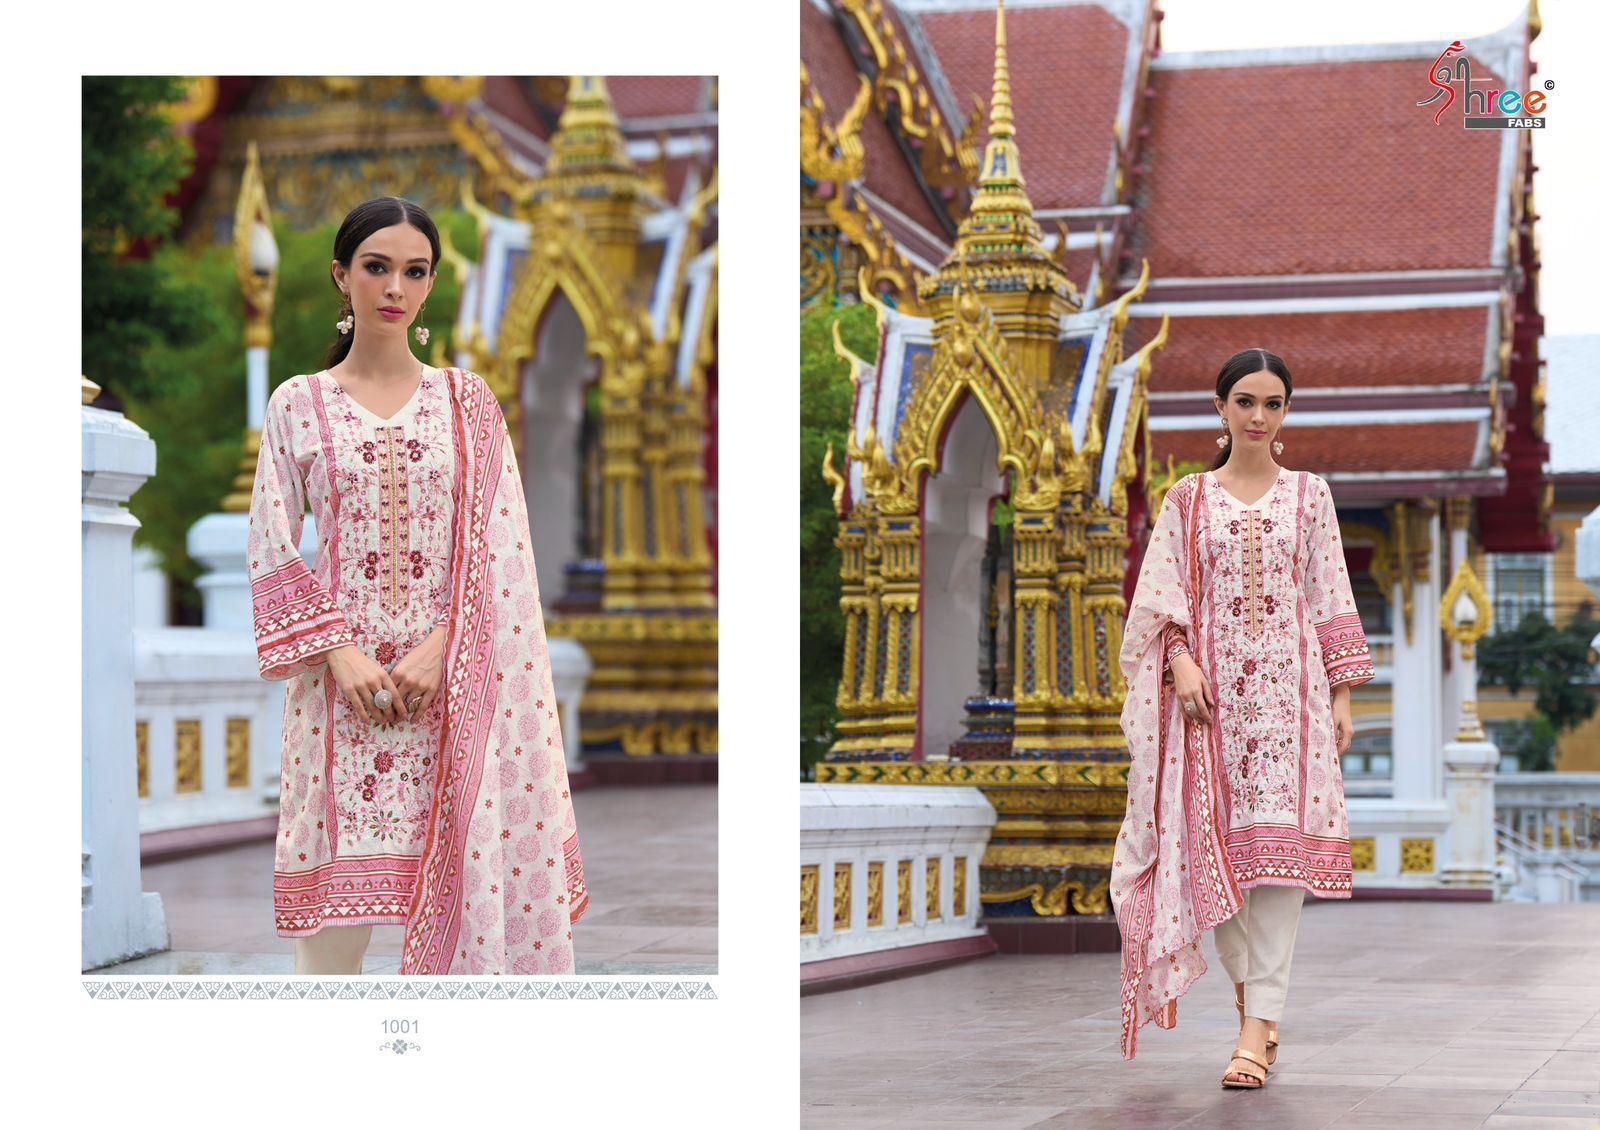 Shree Fabs Riwayat Cotton With Embroidery Work Pakistani Salwar Kameez Latest Collection